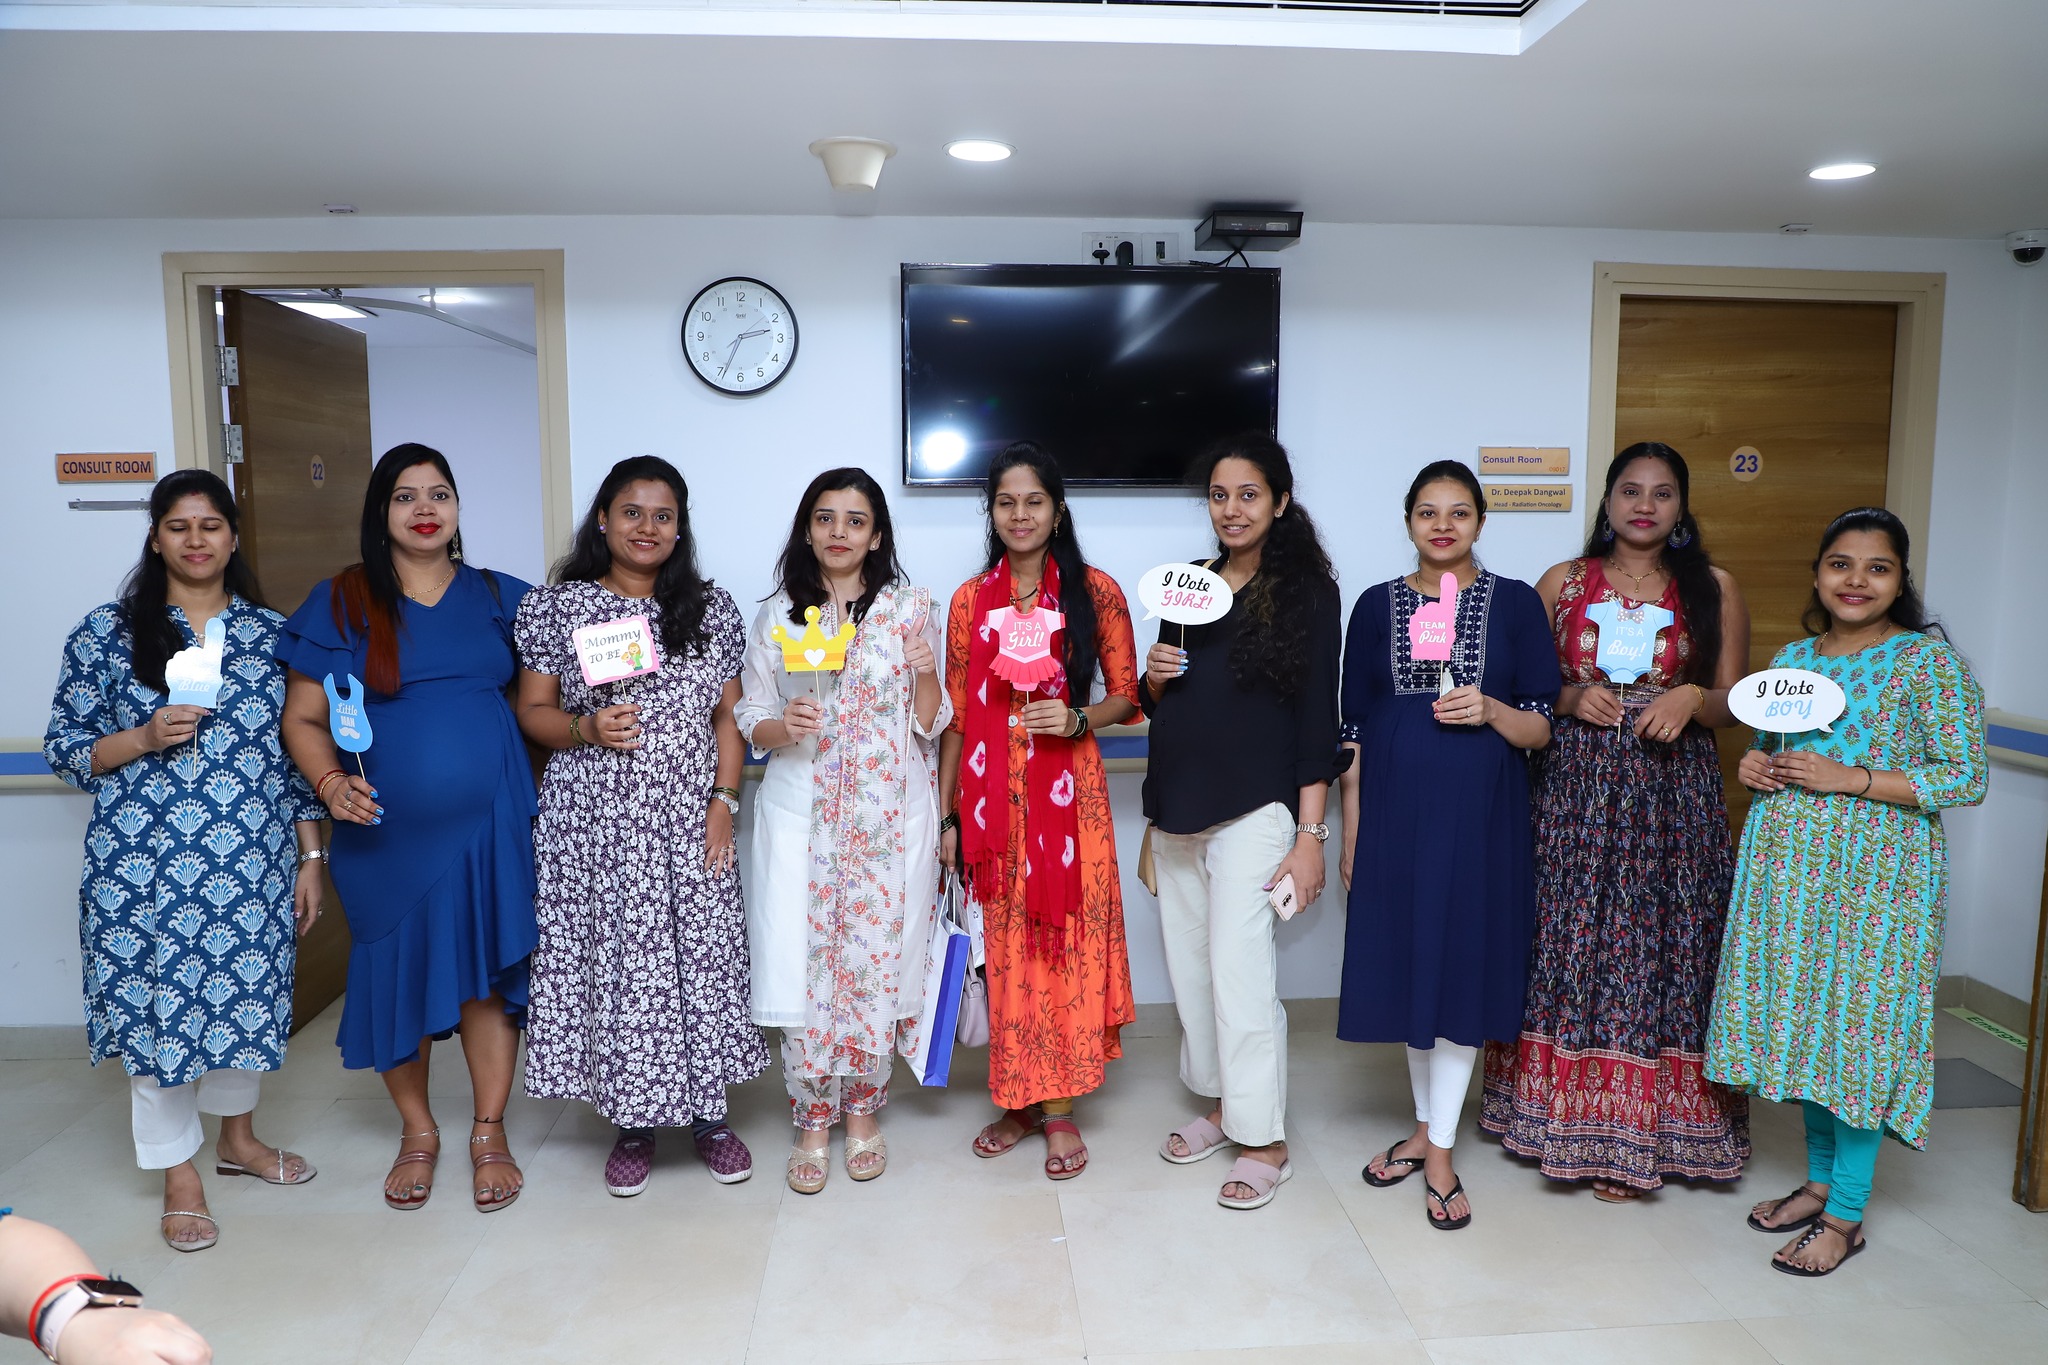 Glimpses from the Baby Shower event